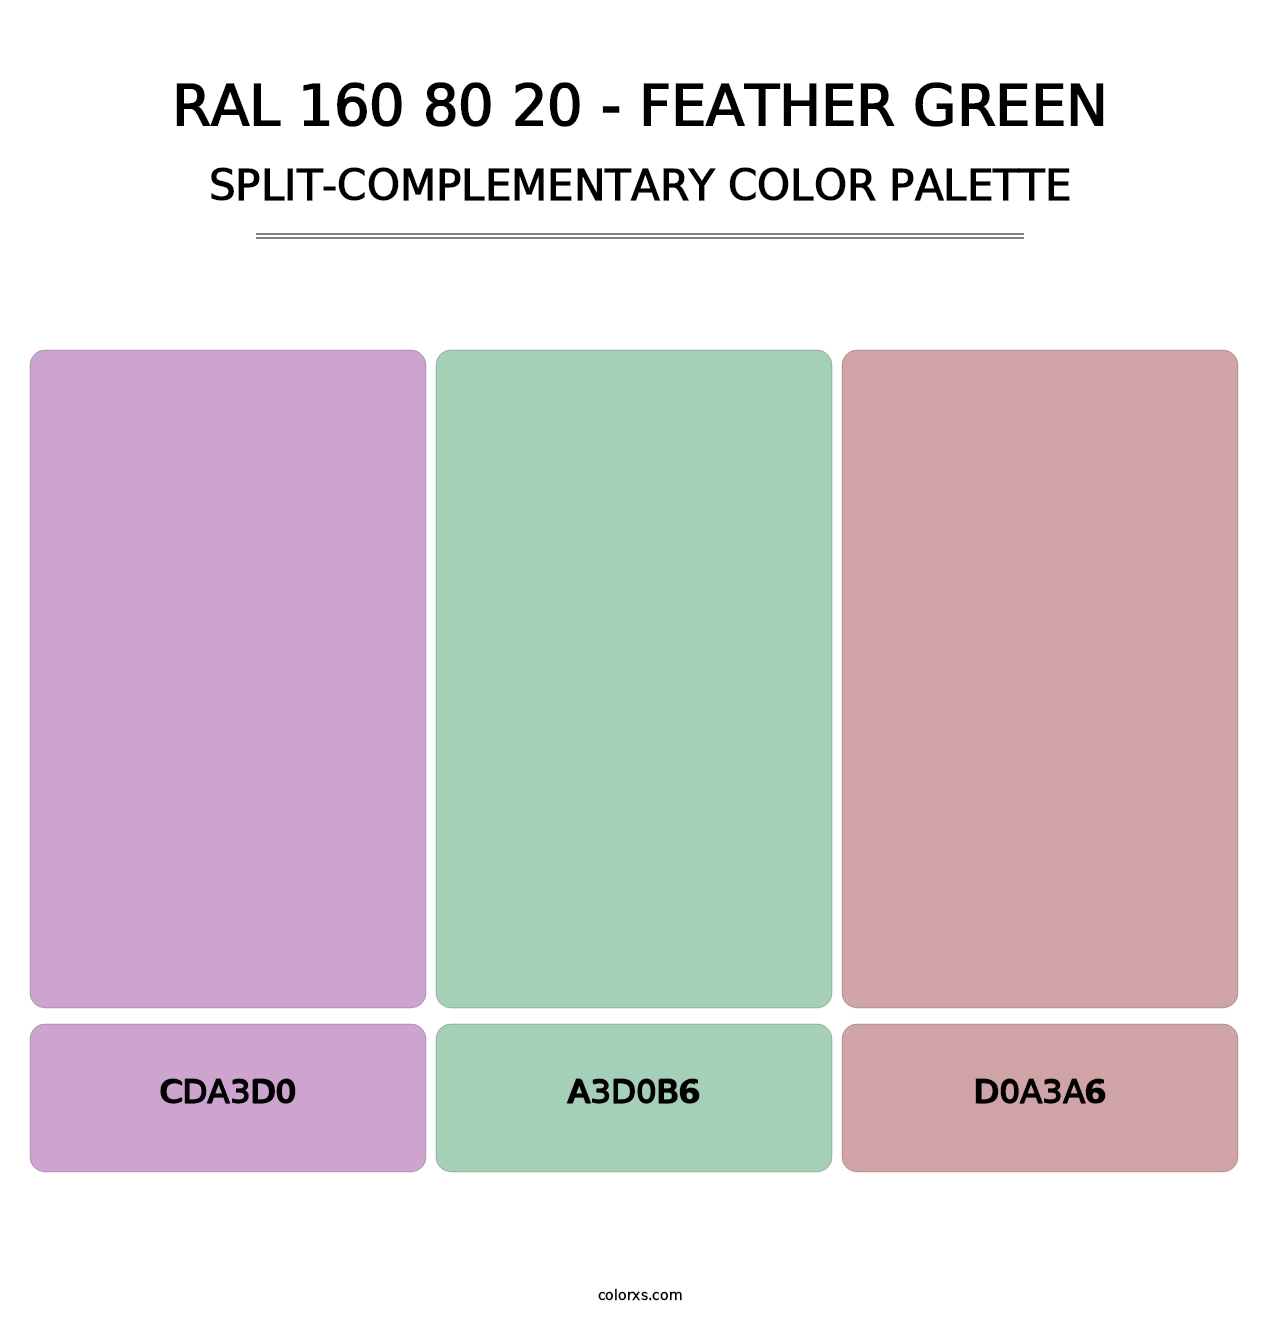 RAL 160 80 20 - Feather Green - Split-Complementary Color Palette